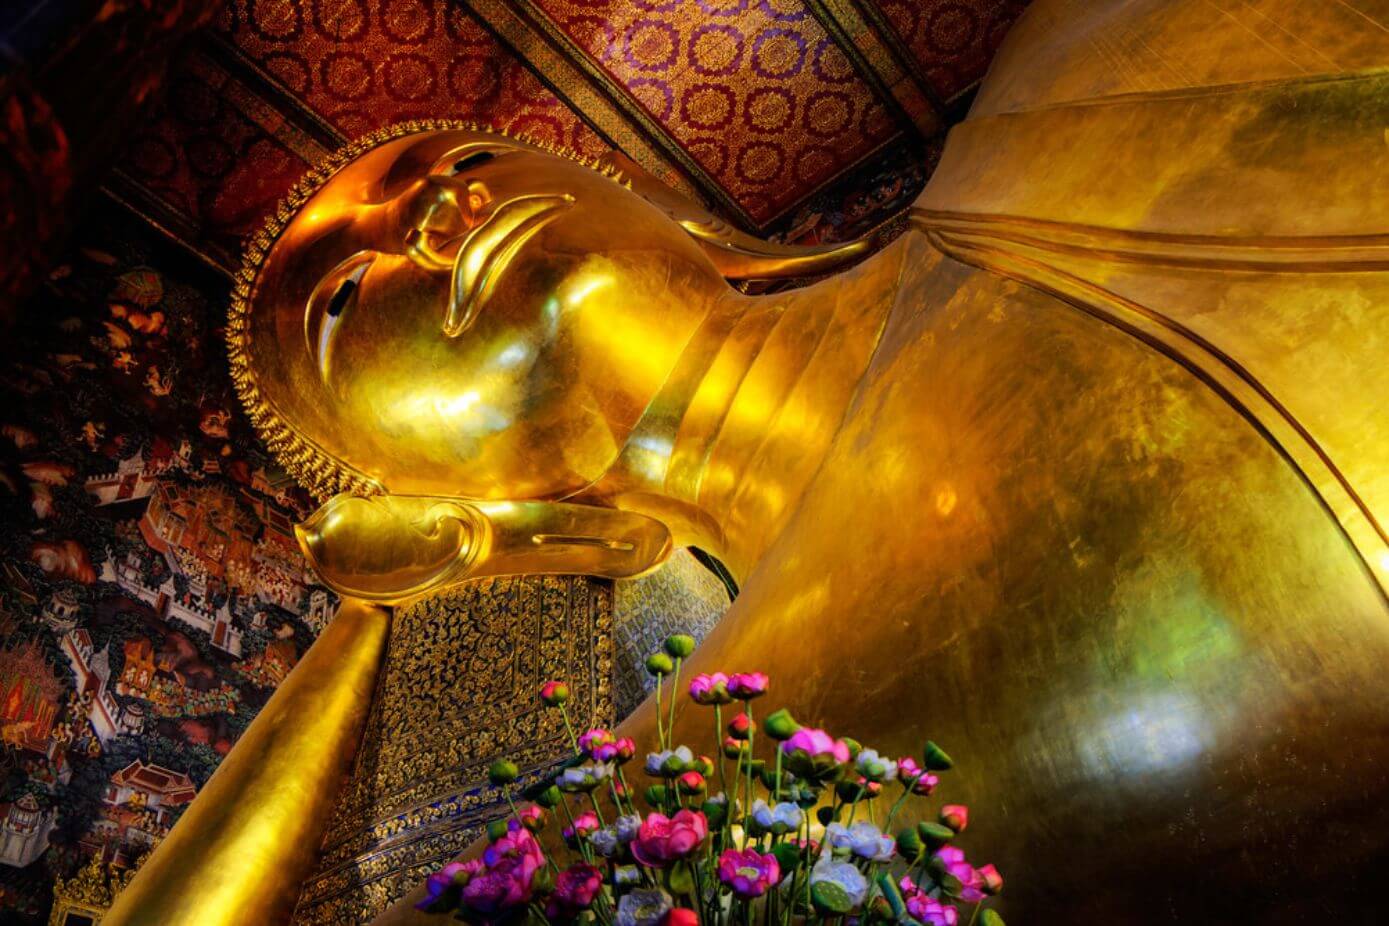 The 15 best things to do in Bangkok - Reclining Buddha